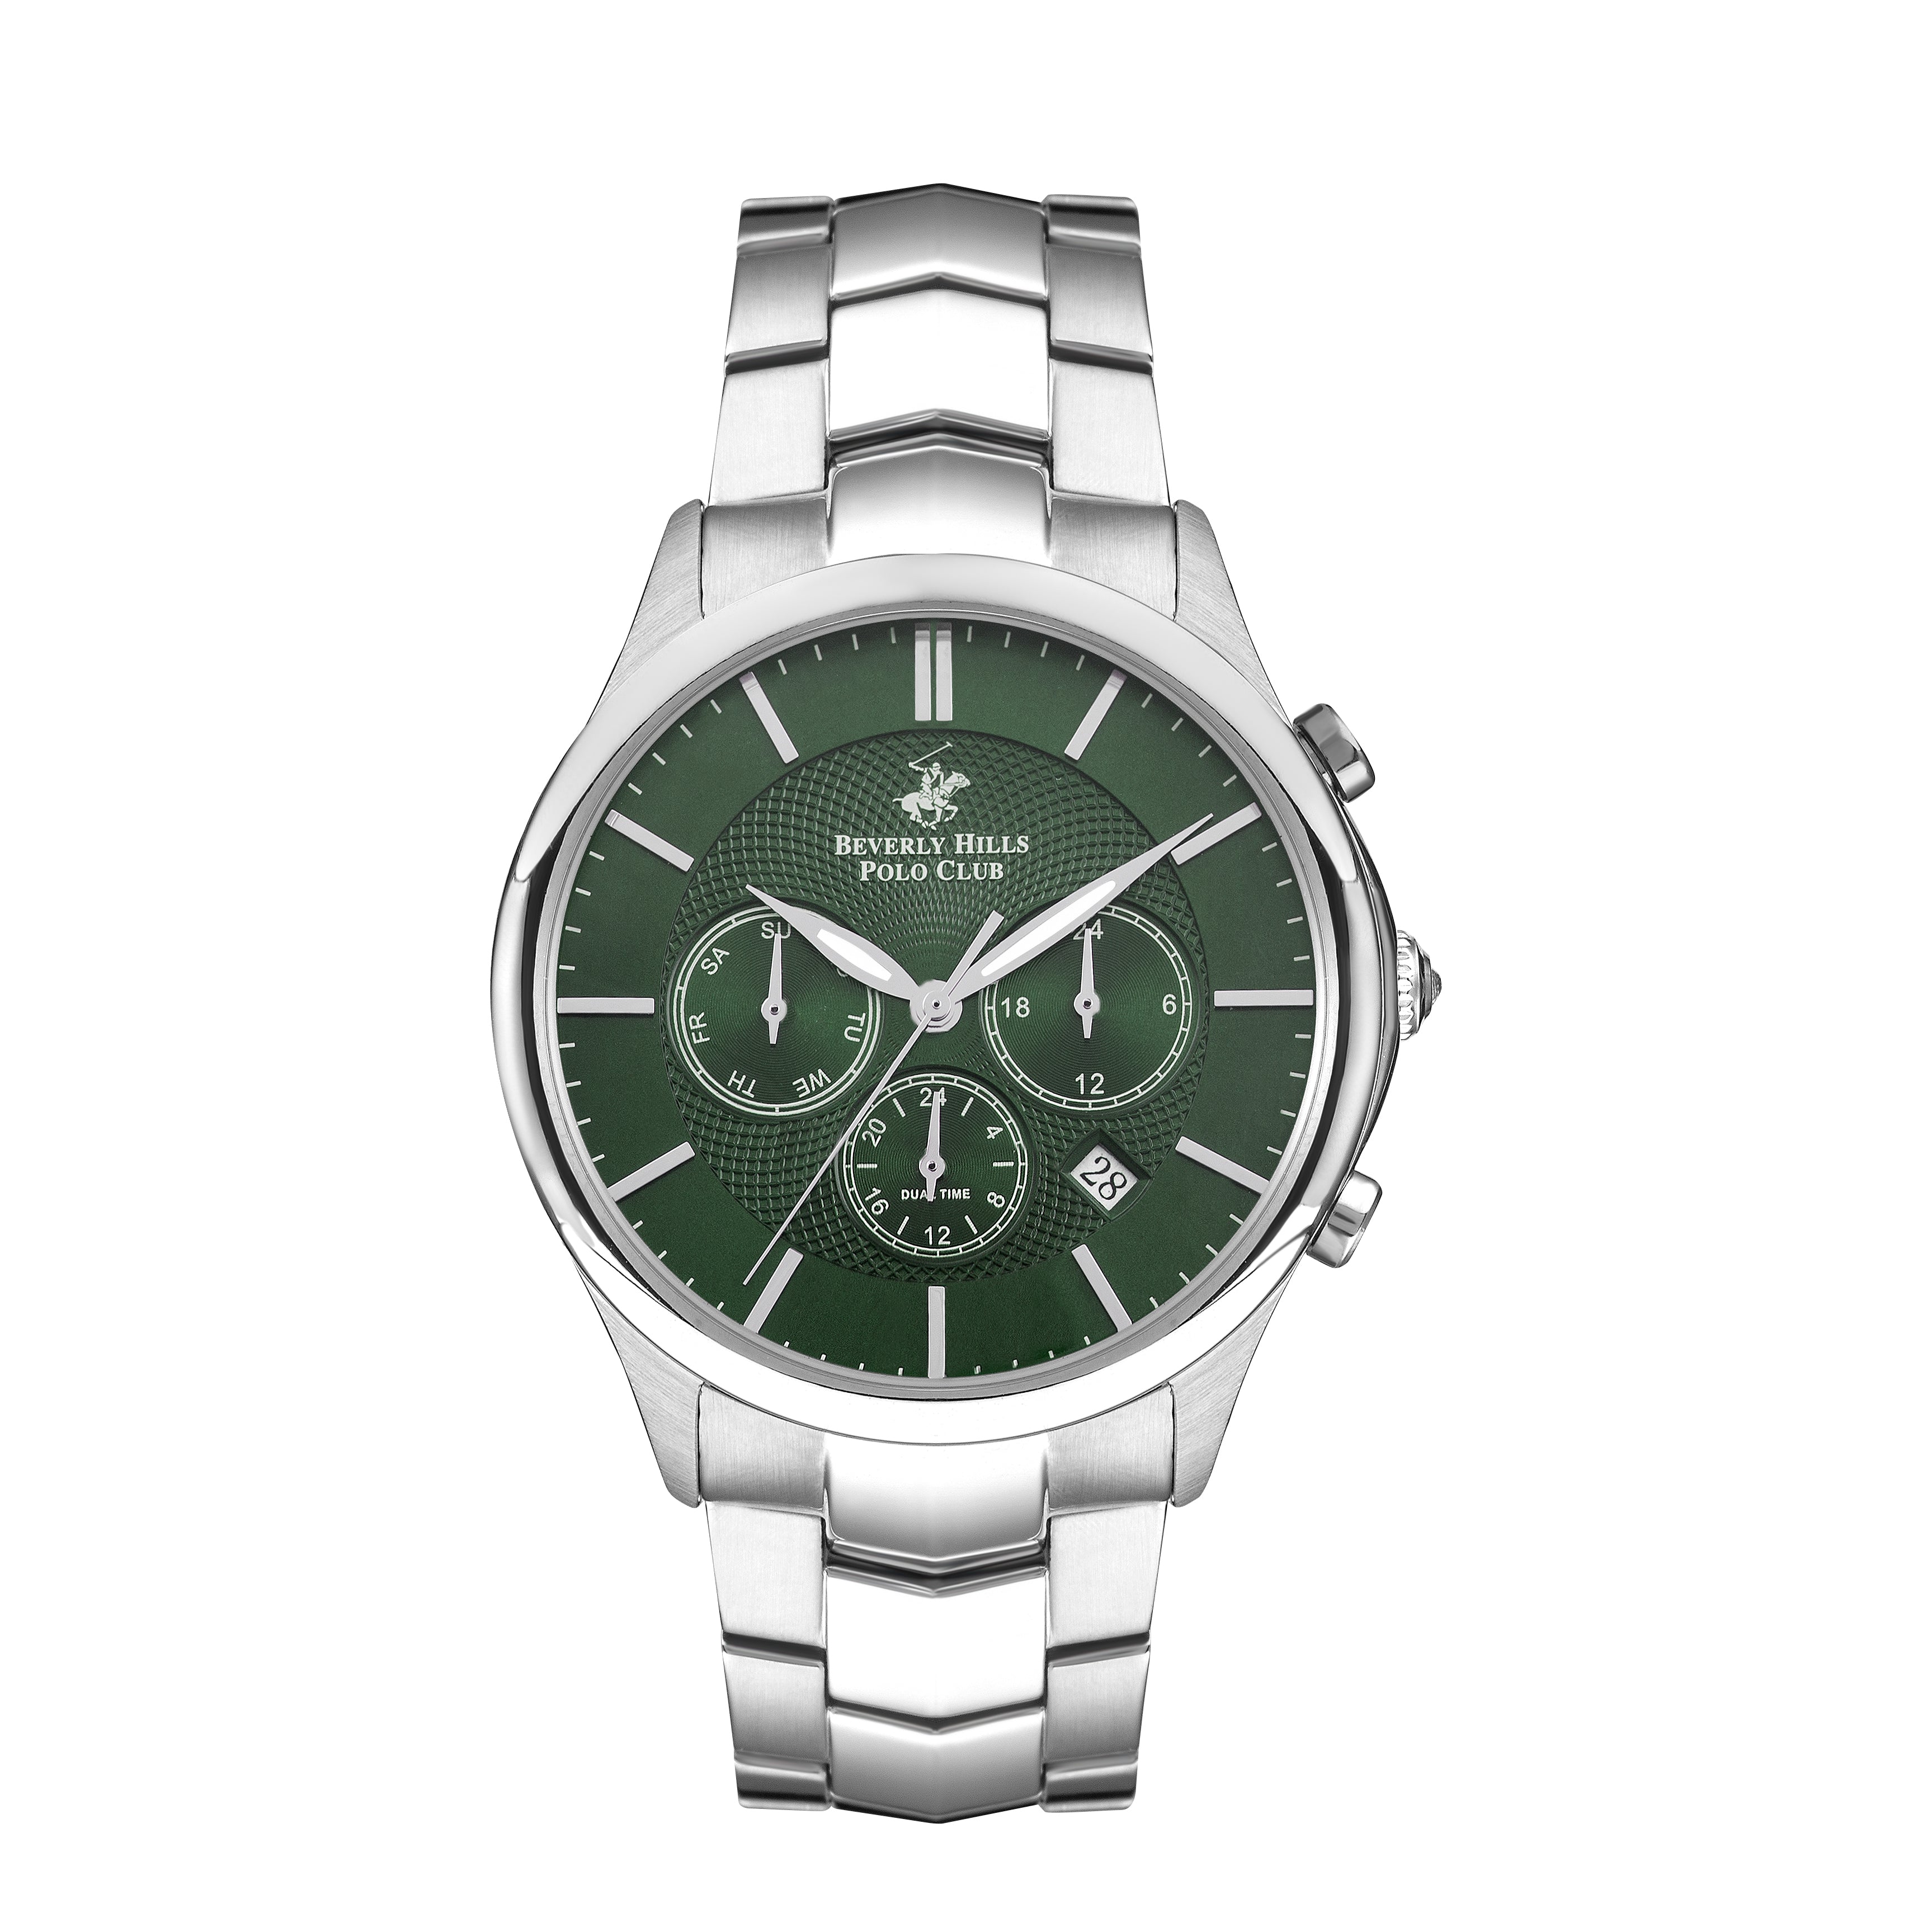 Polo - BP3232X.370 - Gents Stainless Steel Watch